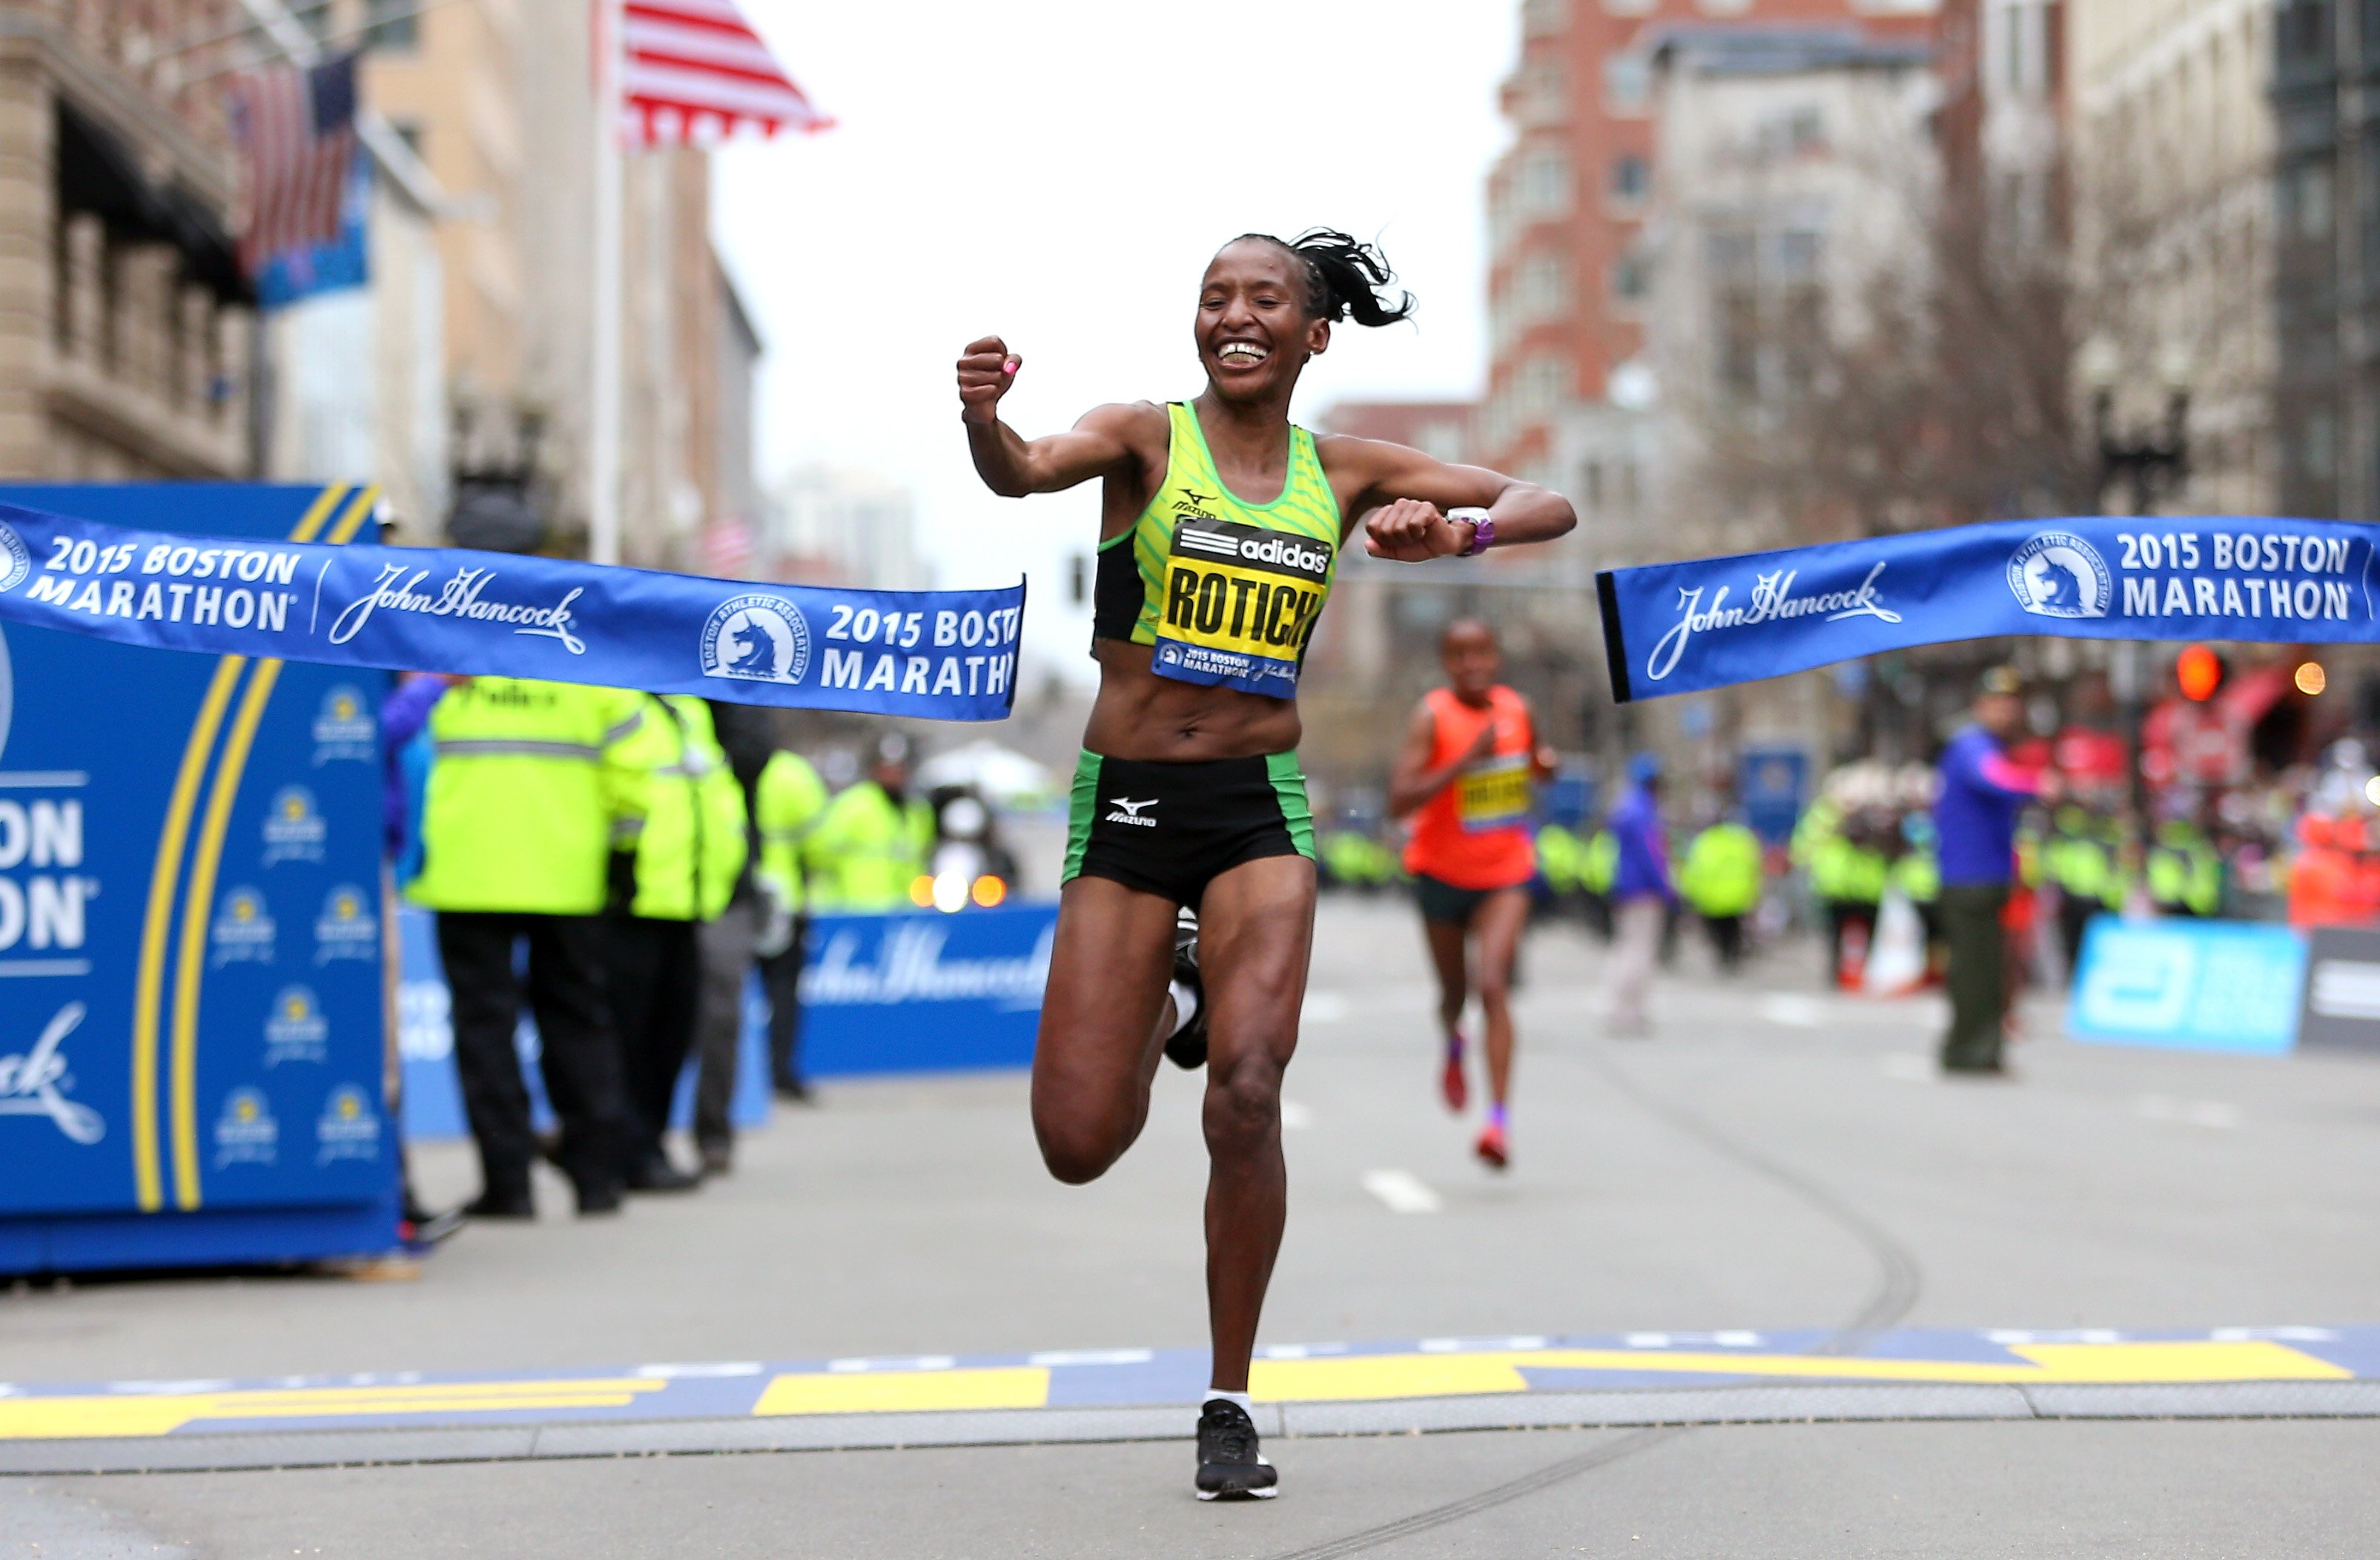 Boston Marathon: How to Find Live Streaming Video | Time